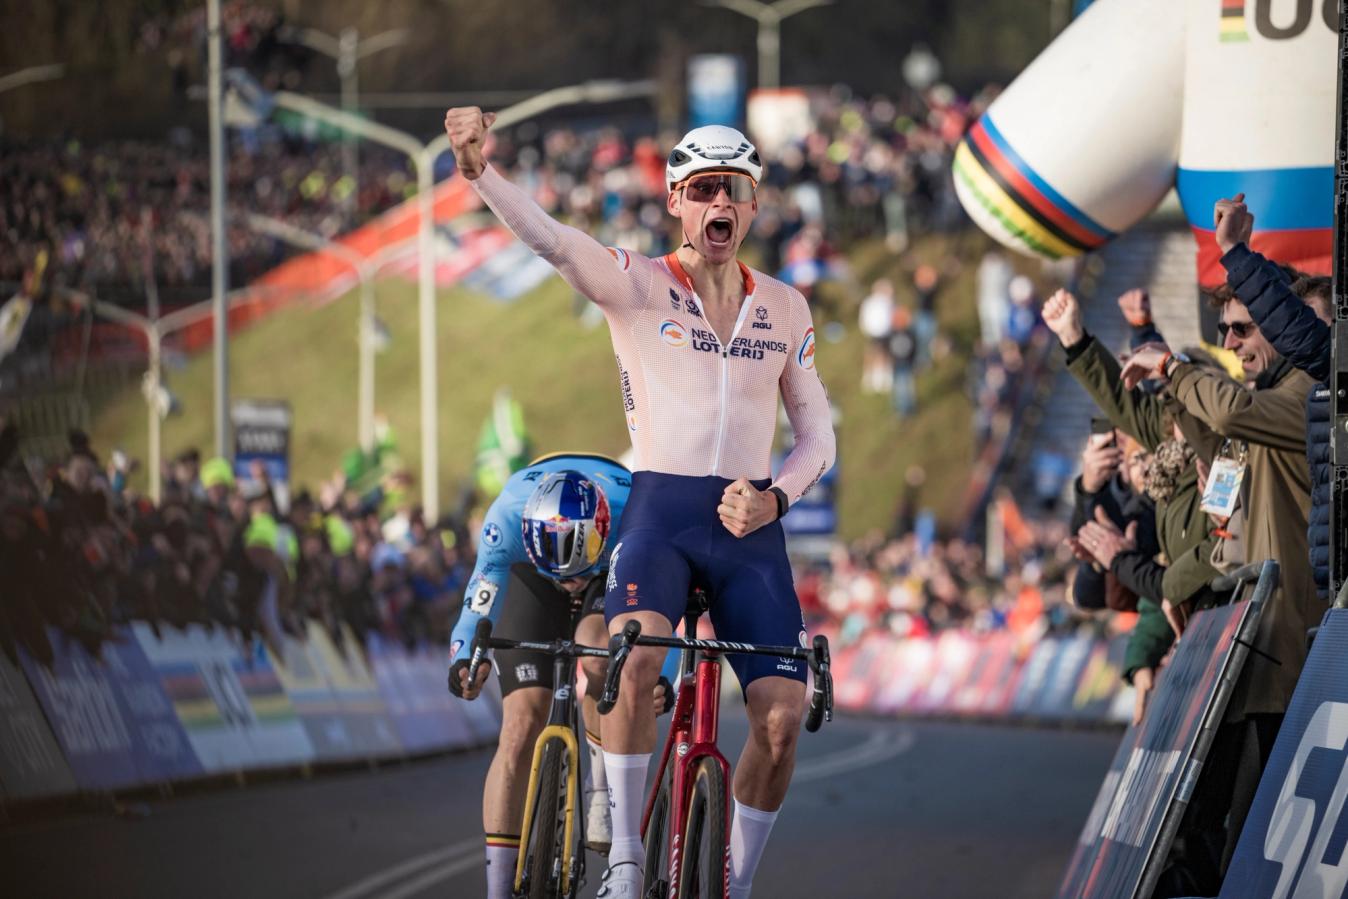 Van Der Poel has used the Canyon Inflite to great success across his recent cyclo-cross campaigns 